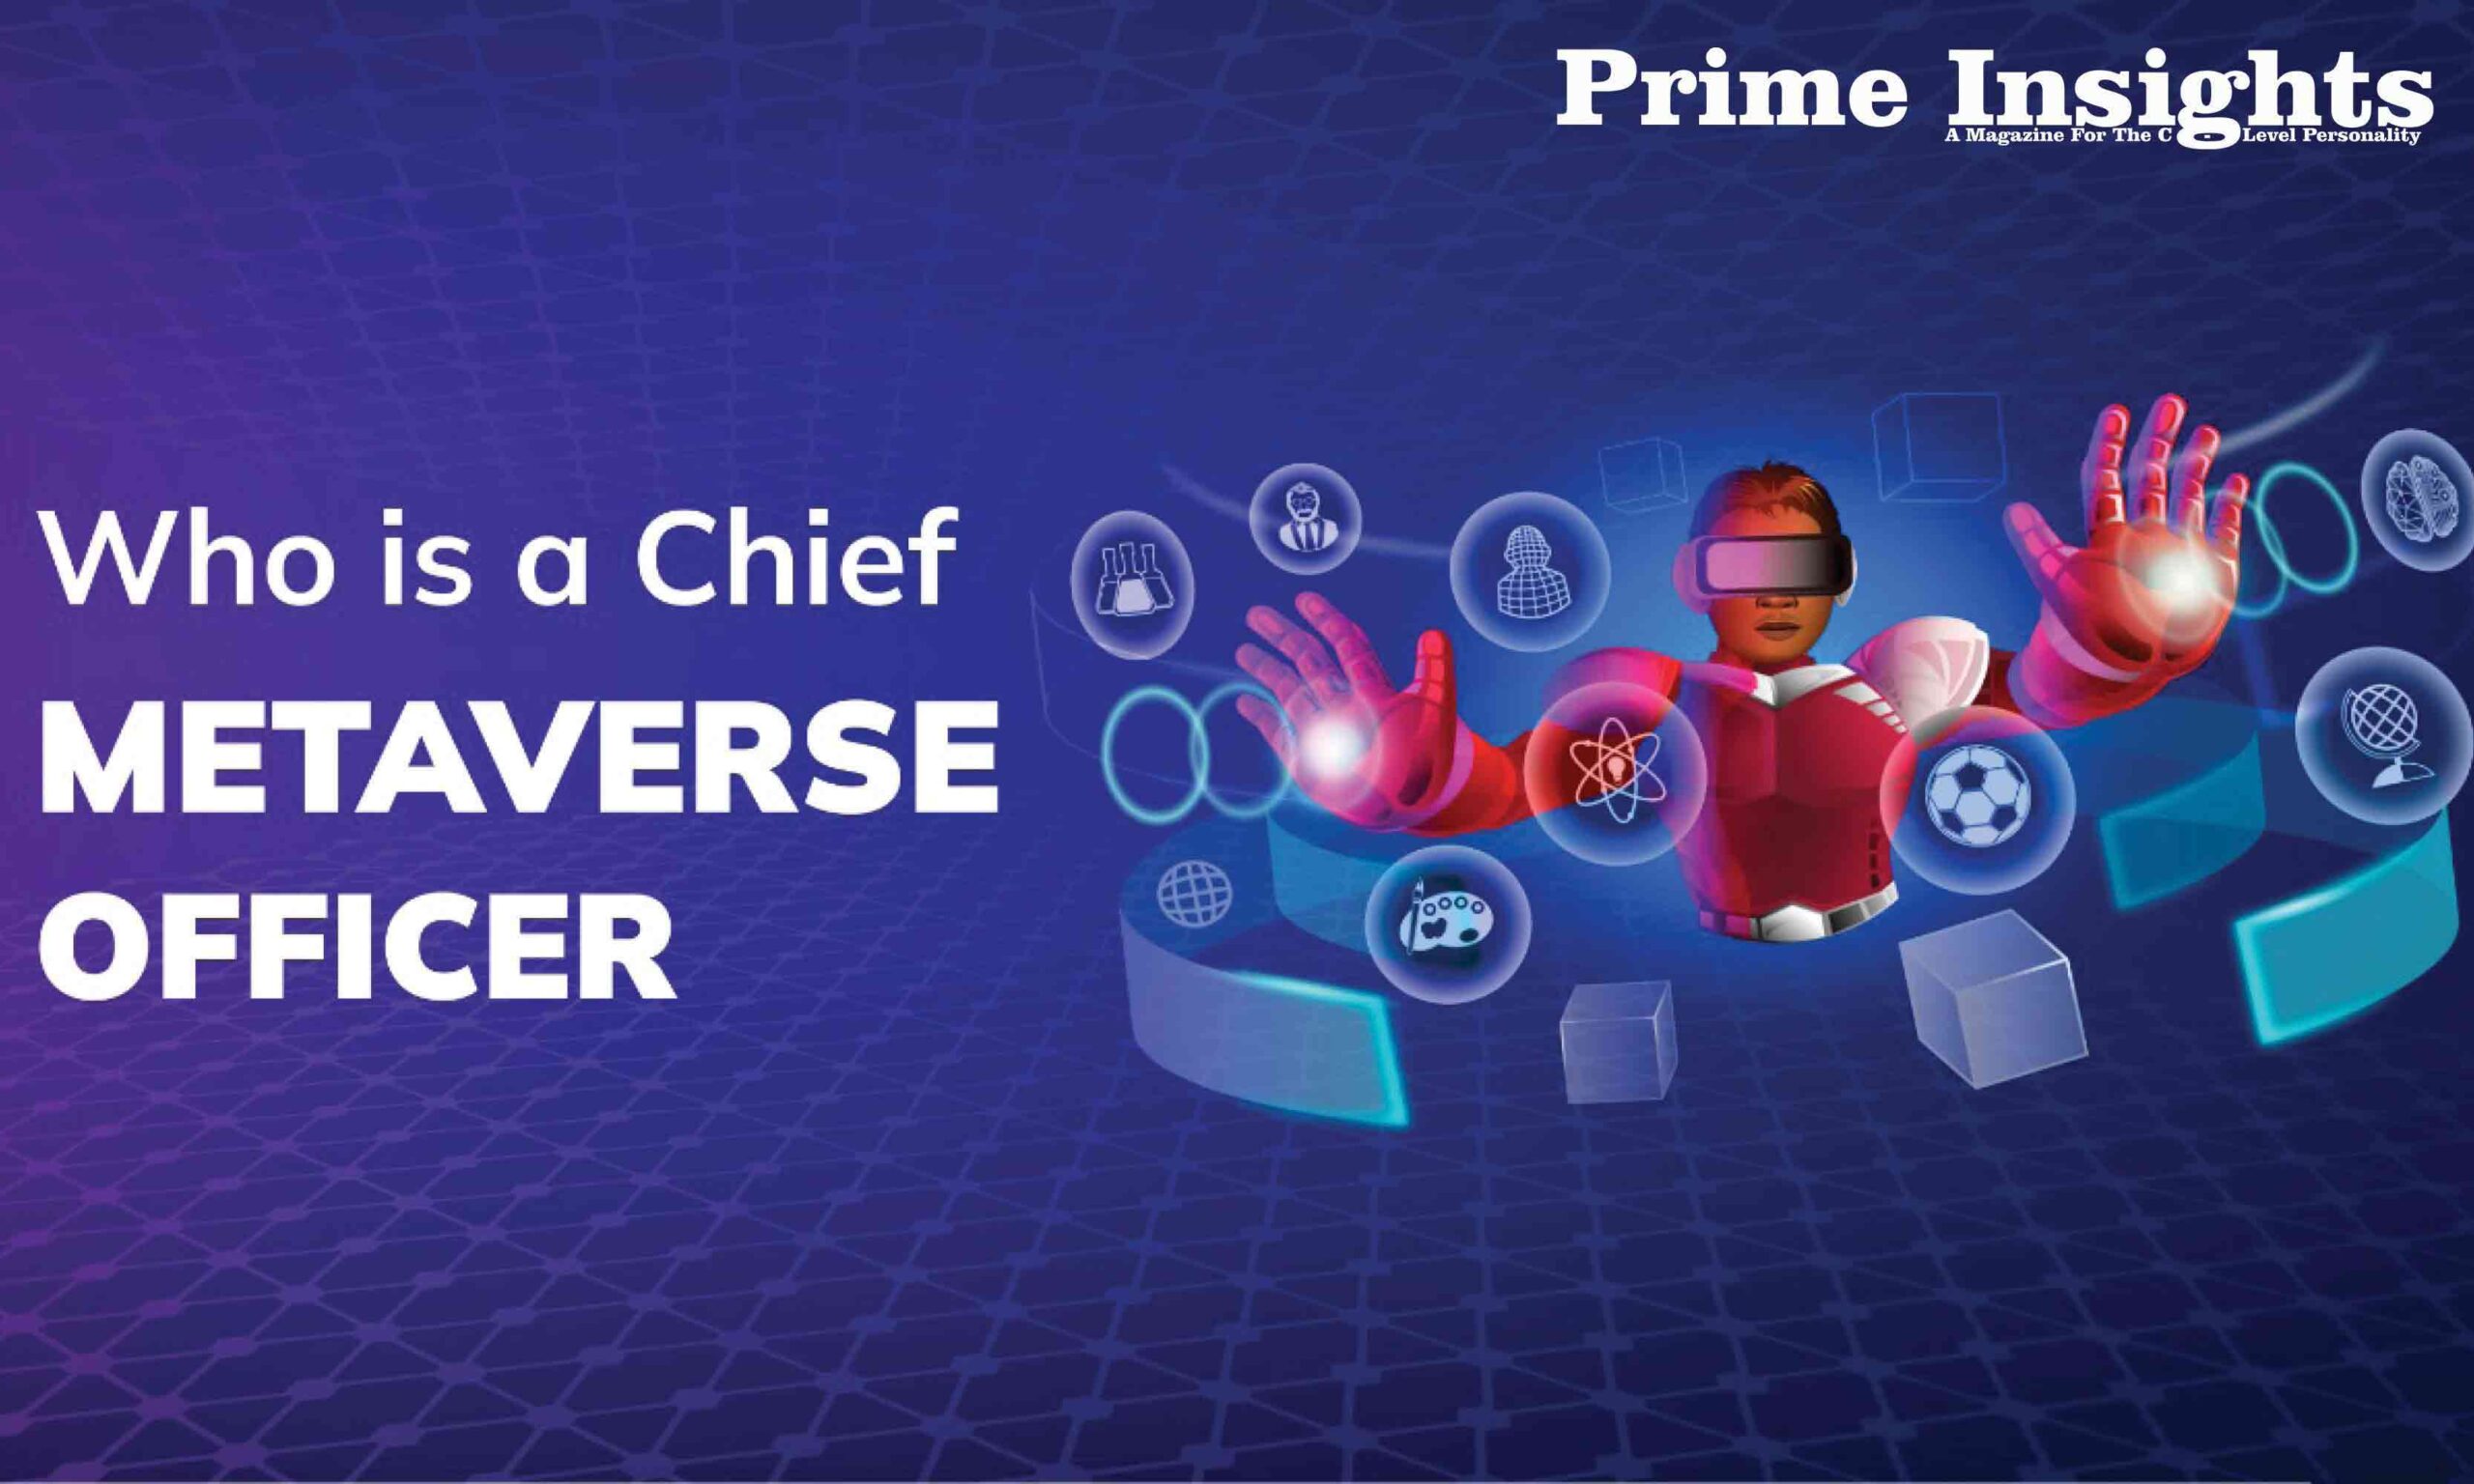 Who is a Chief Metaverse Officer